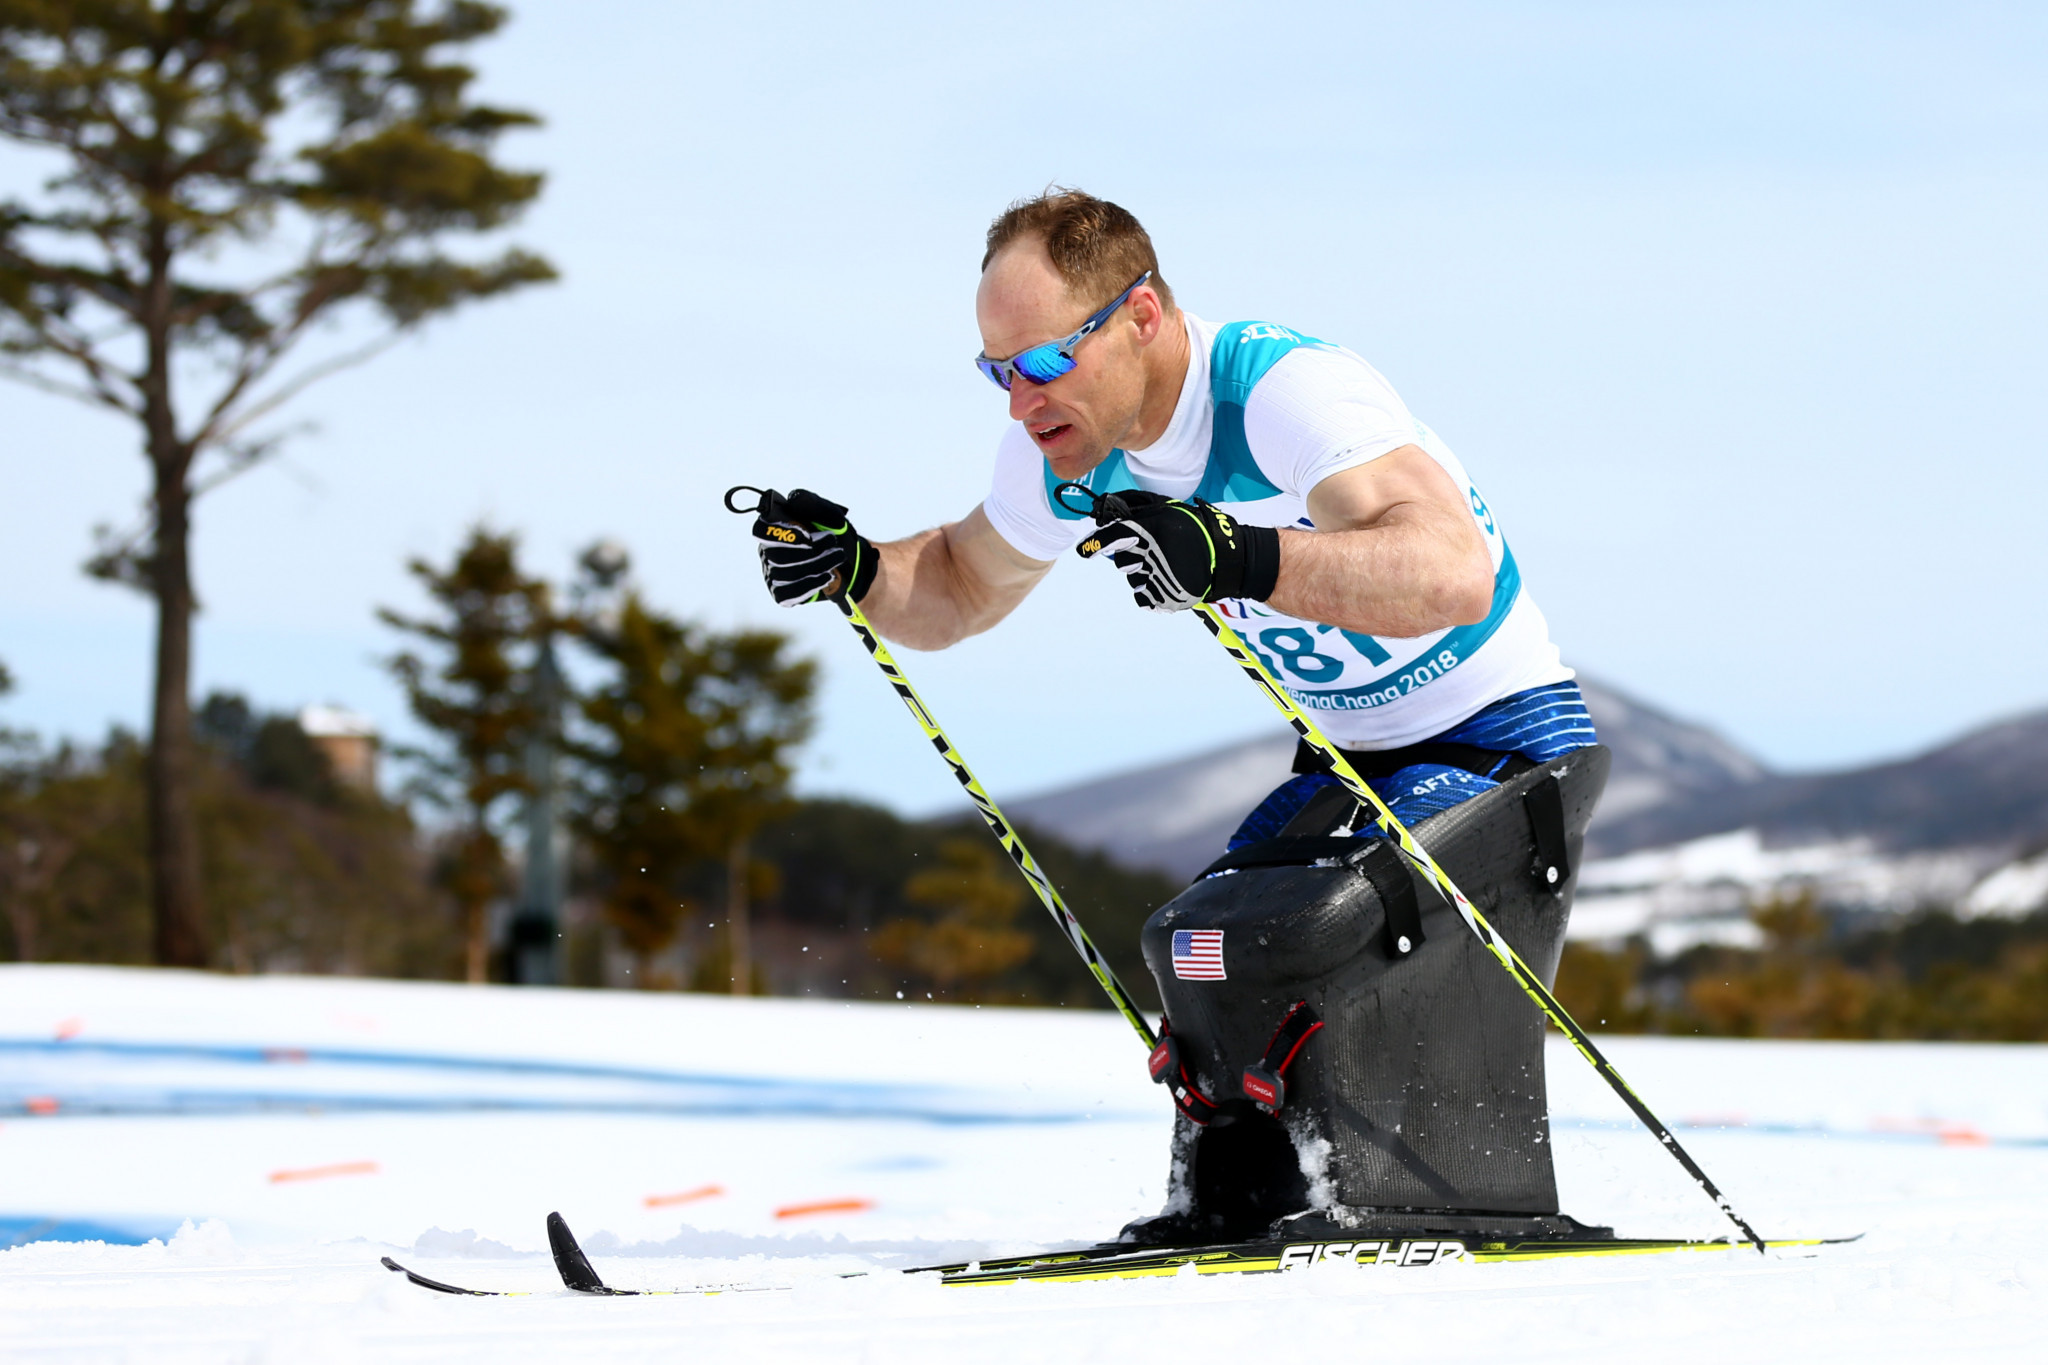 Former Navy Seal Daniel Cnossen won six medals at Pyeongchang 2018 ©Getty Images